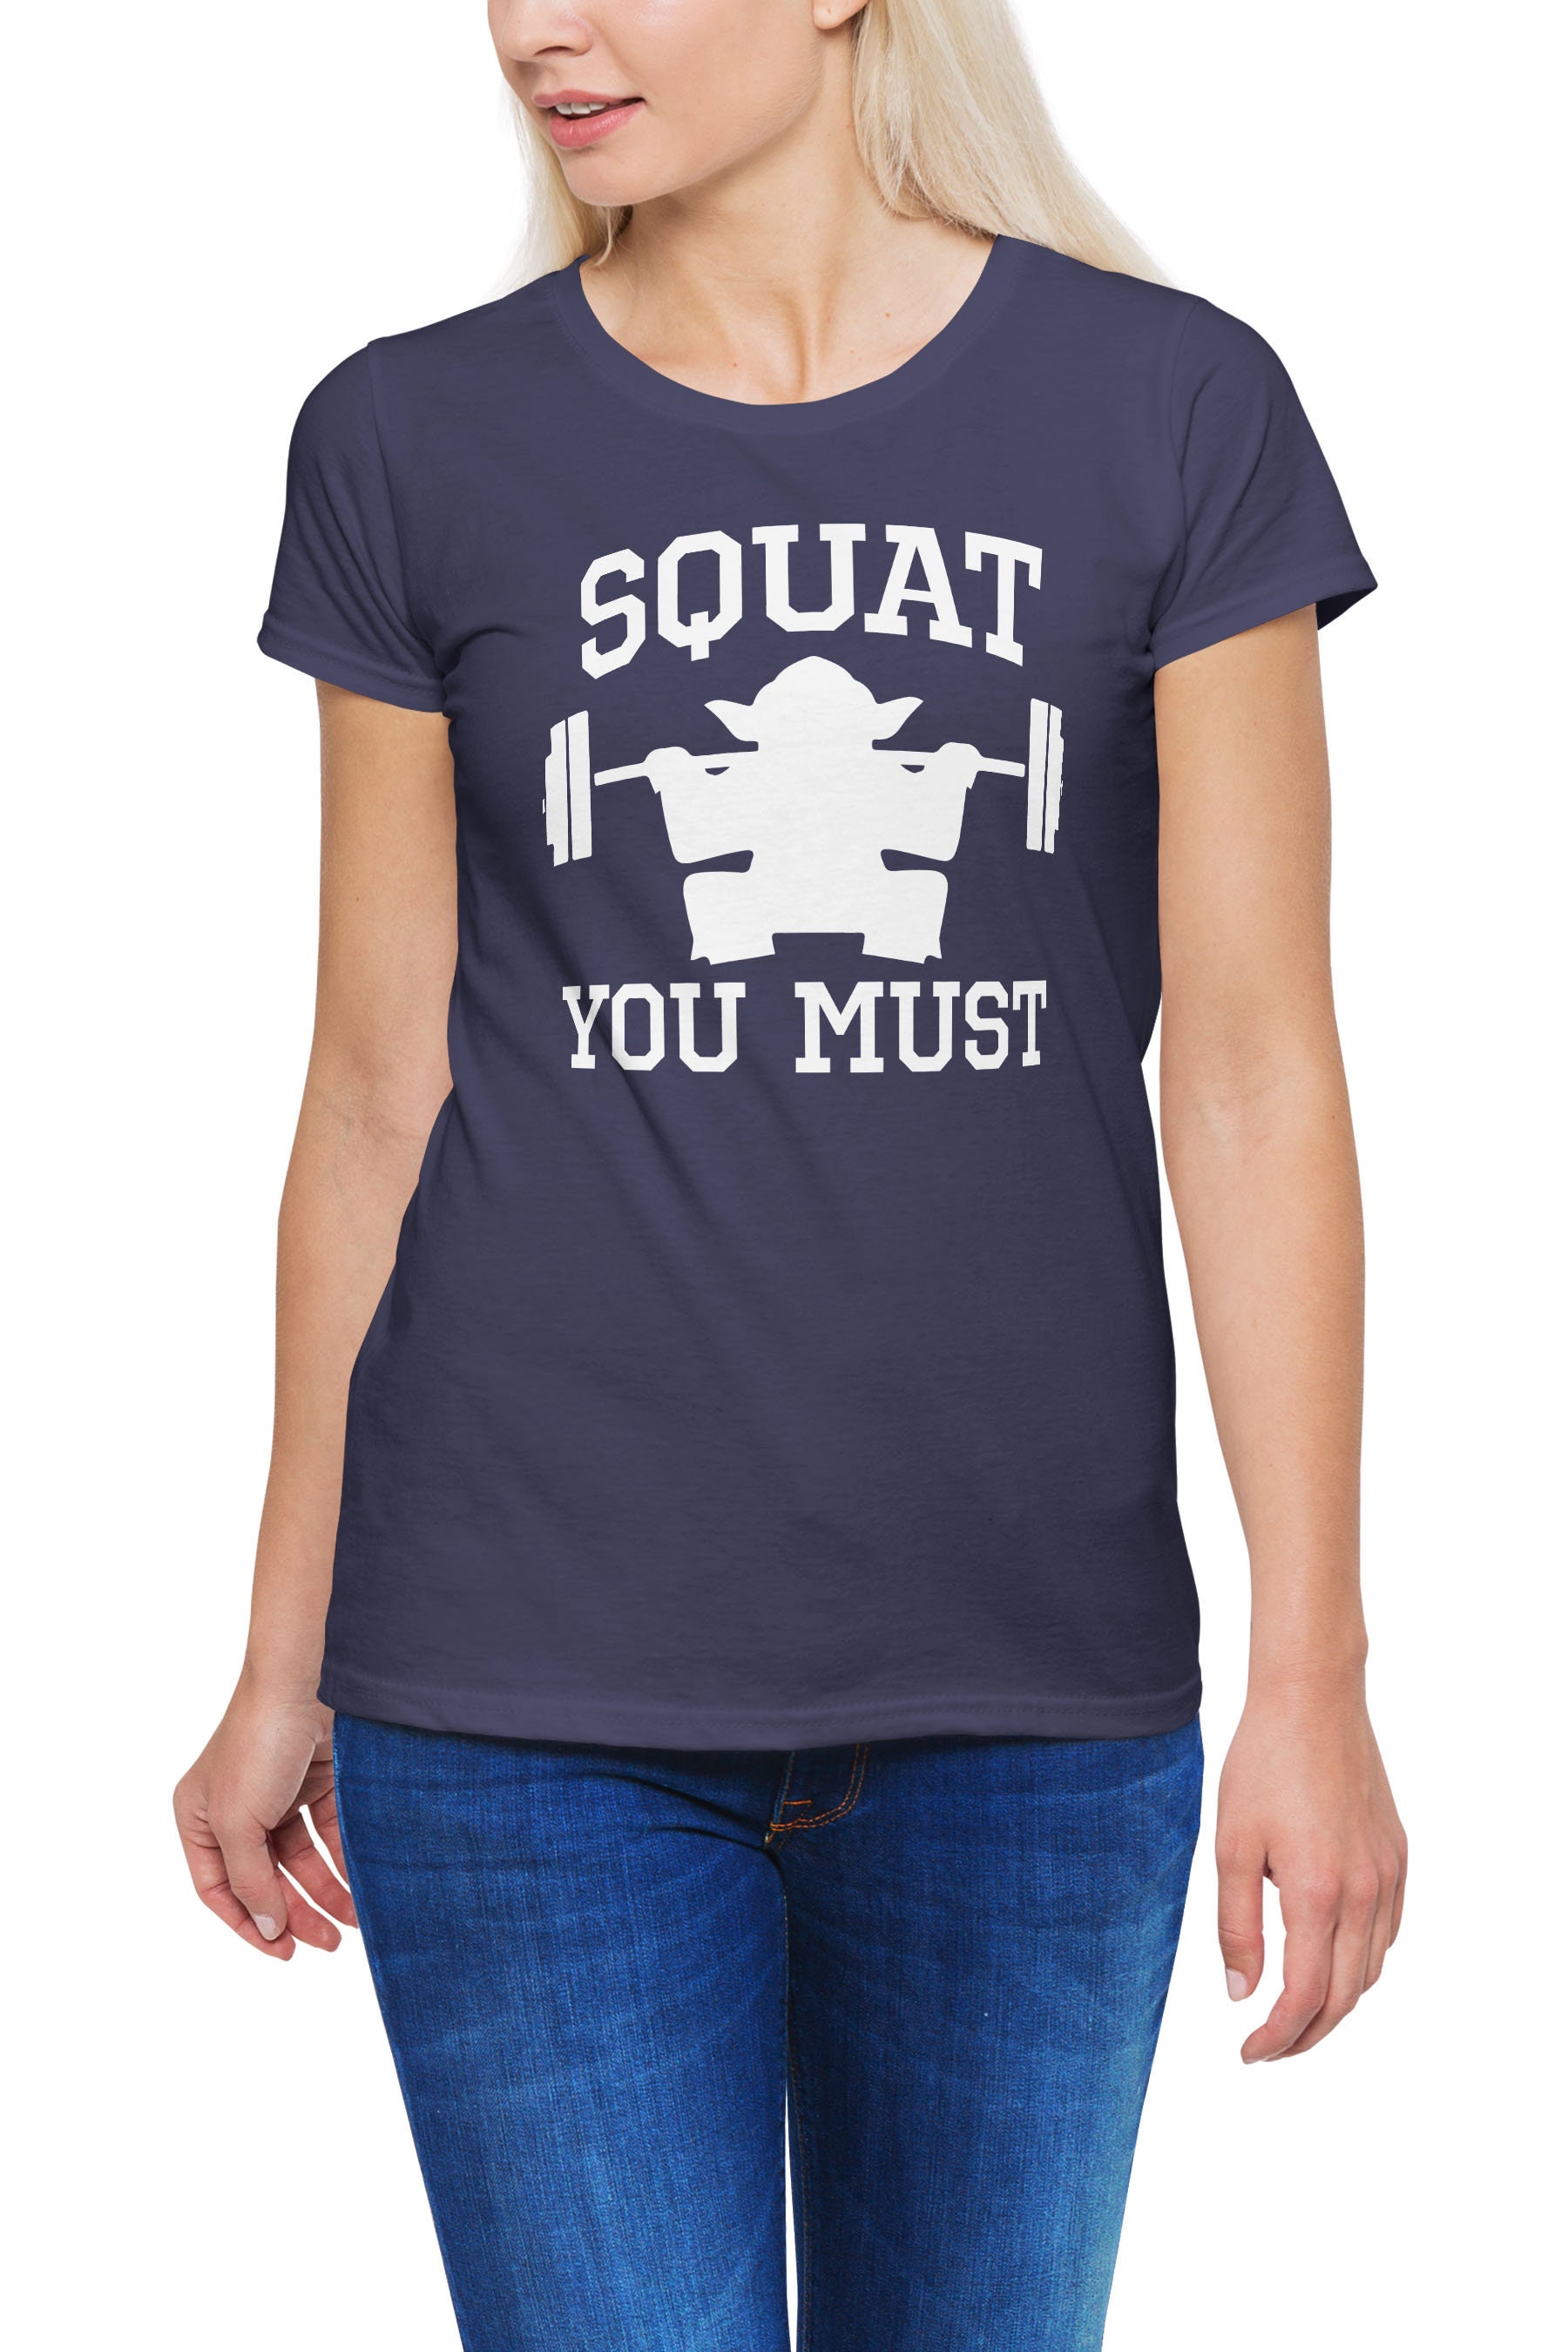 All Star Wars Fans Need This Workout Gear In Their Lives